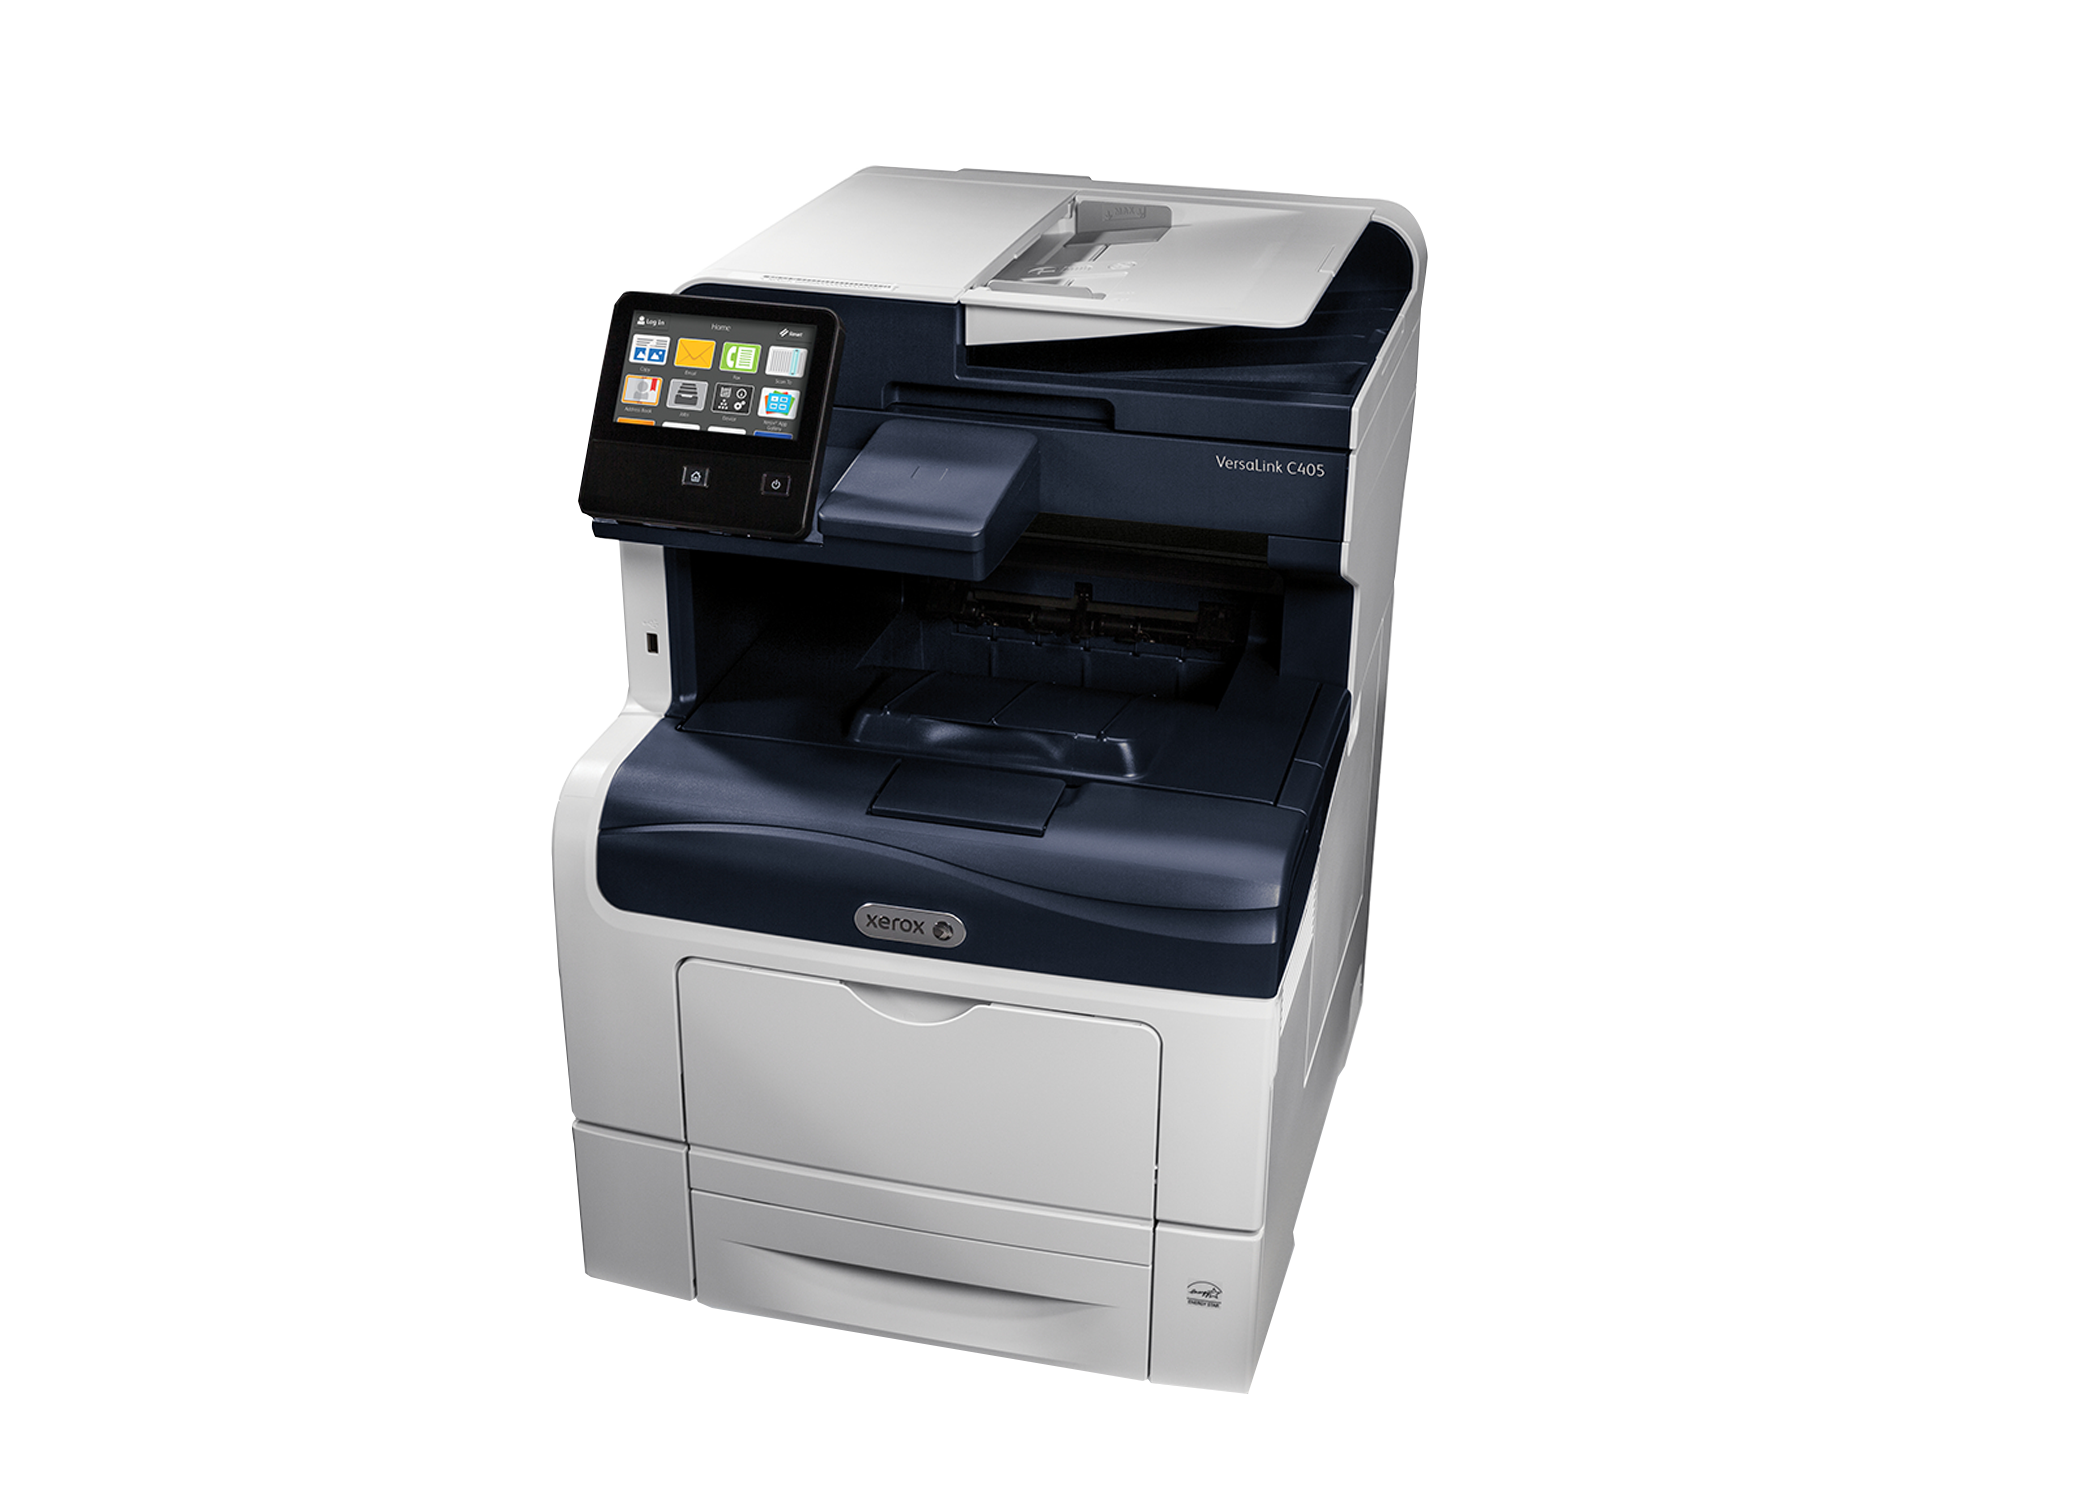 picture of the copier